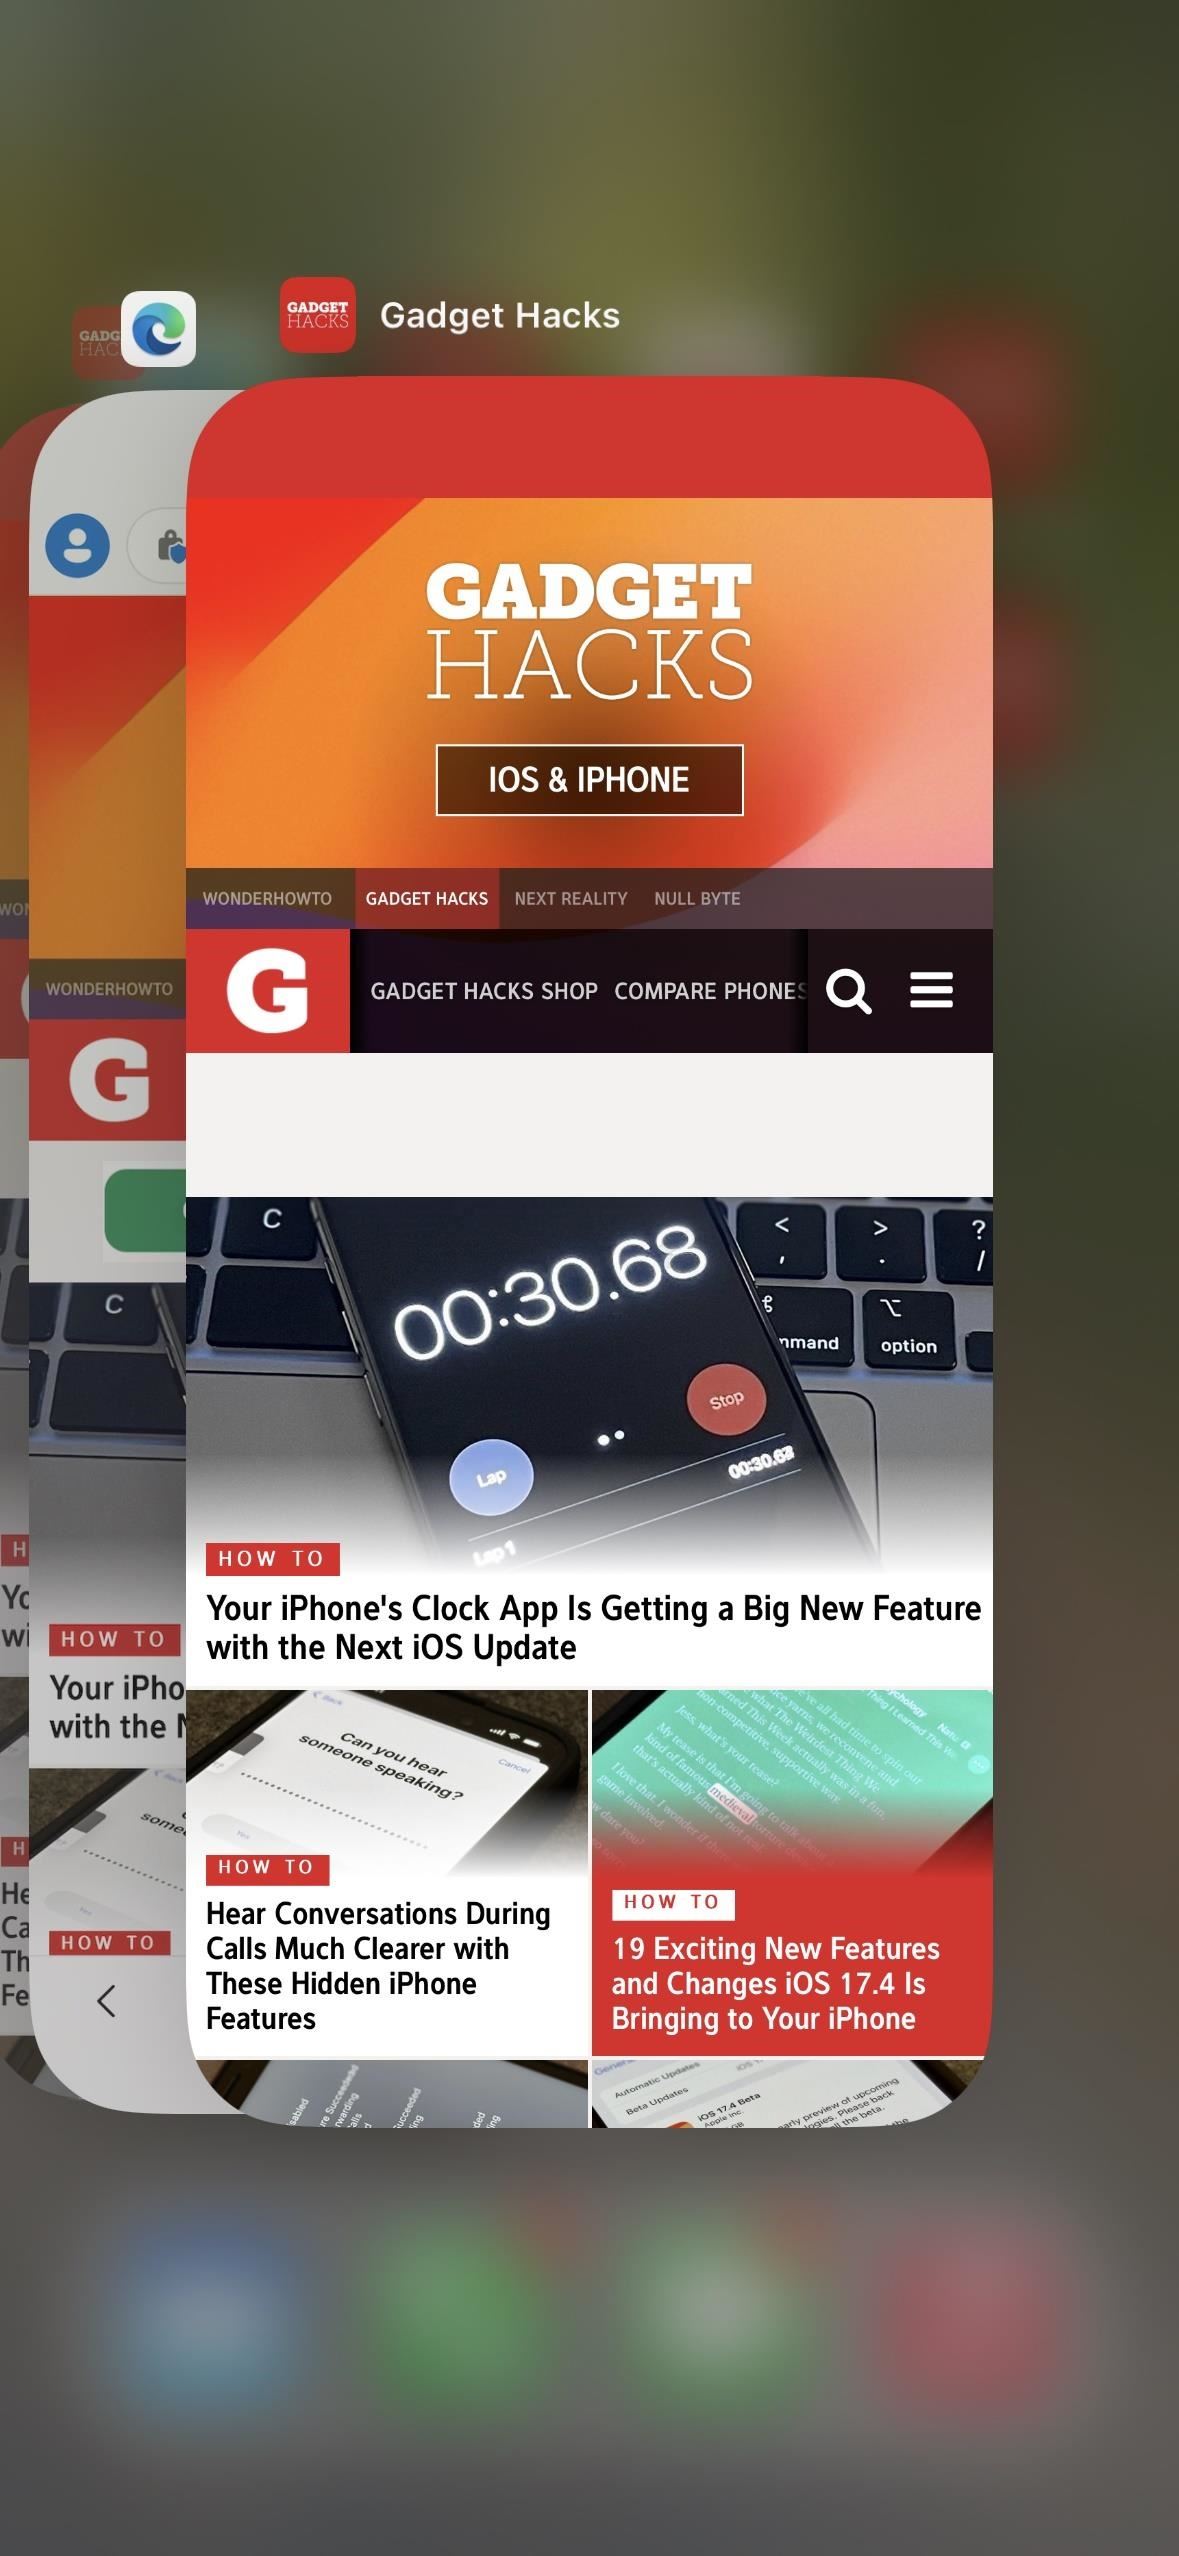 You Don't Need Safari to Add Web Apps to Your iPhone's Home Screen — Try These Browsers Instead